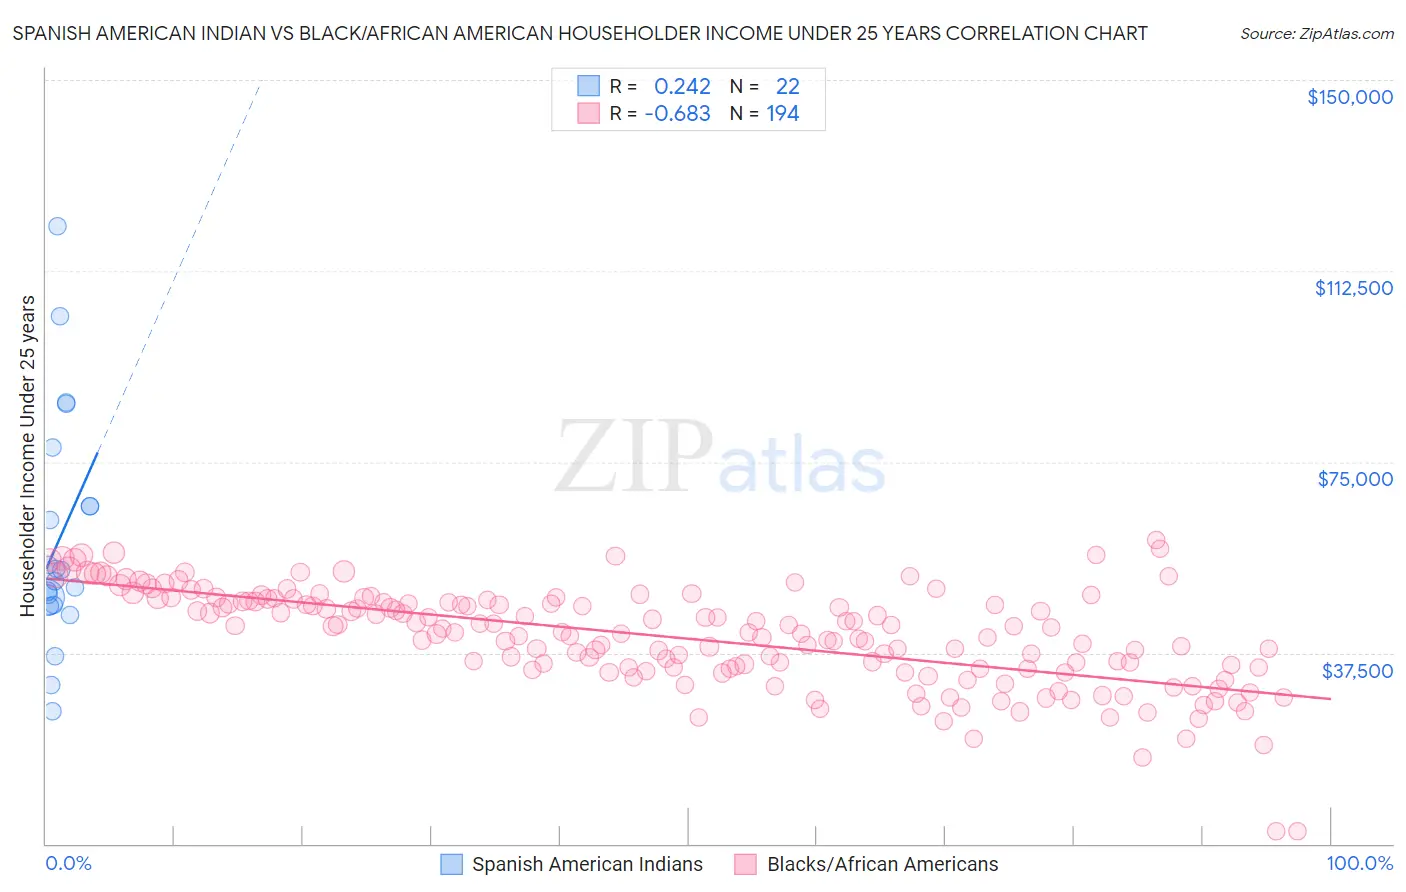 Spanish American Indian vs Black/African American Householder Income Under 25 years